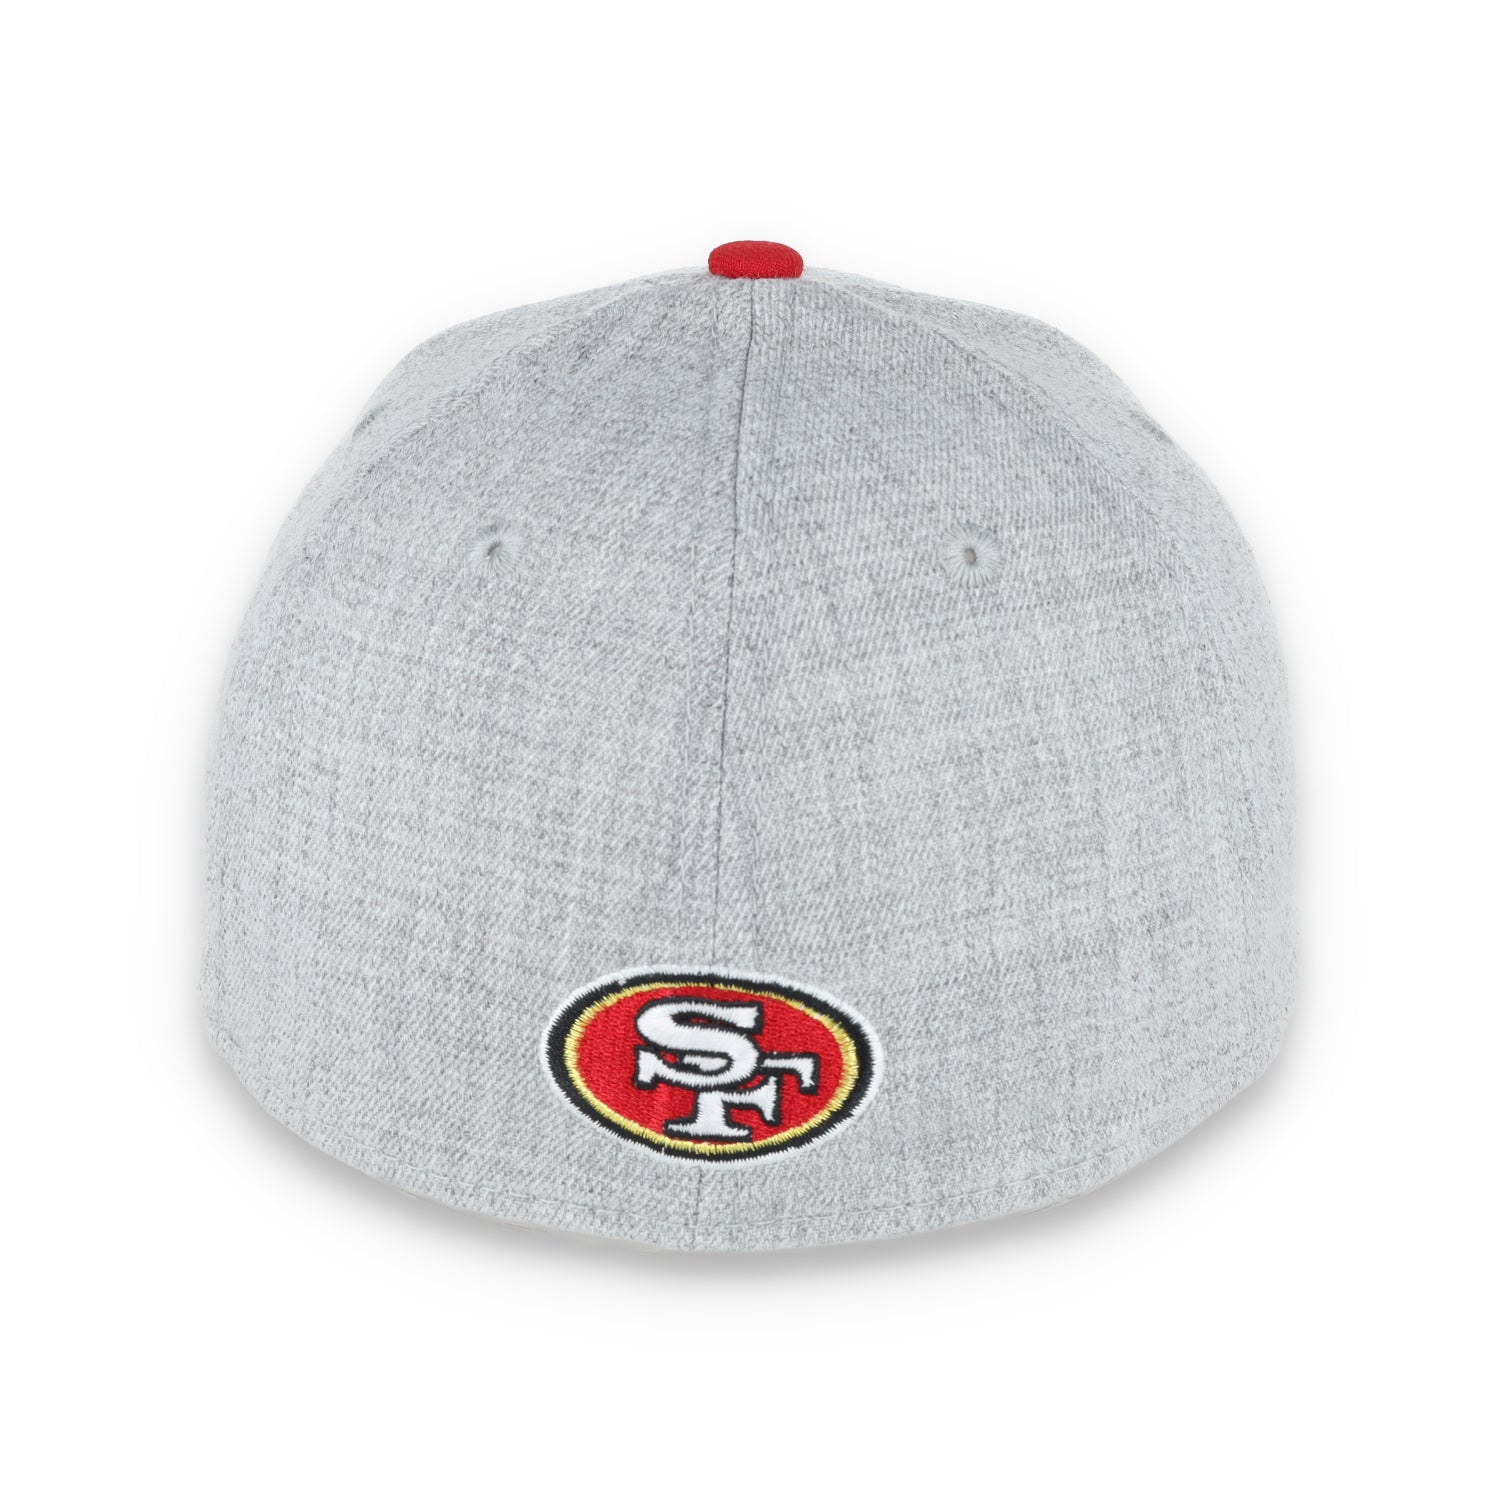 New Era San Francisco 49ers 39THIRTY FITTED HAT